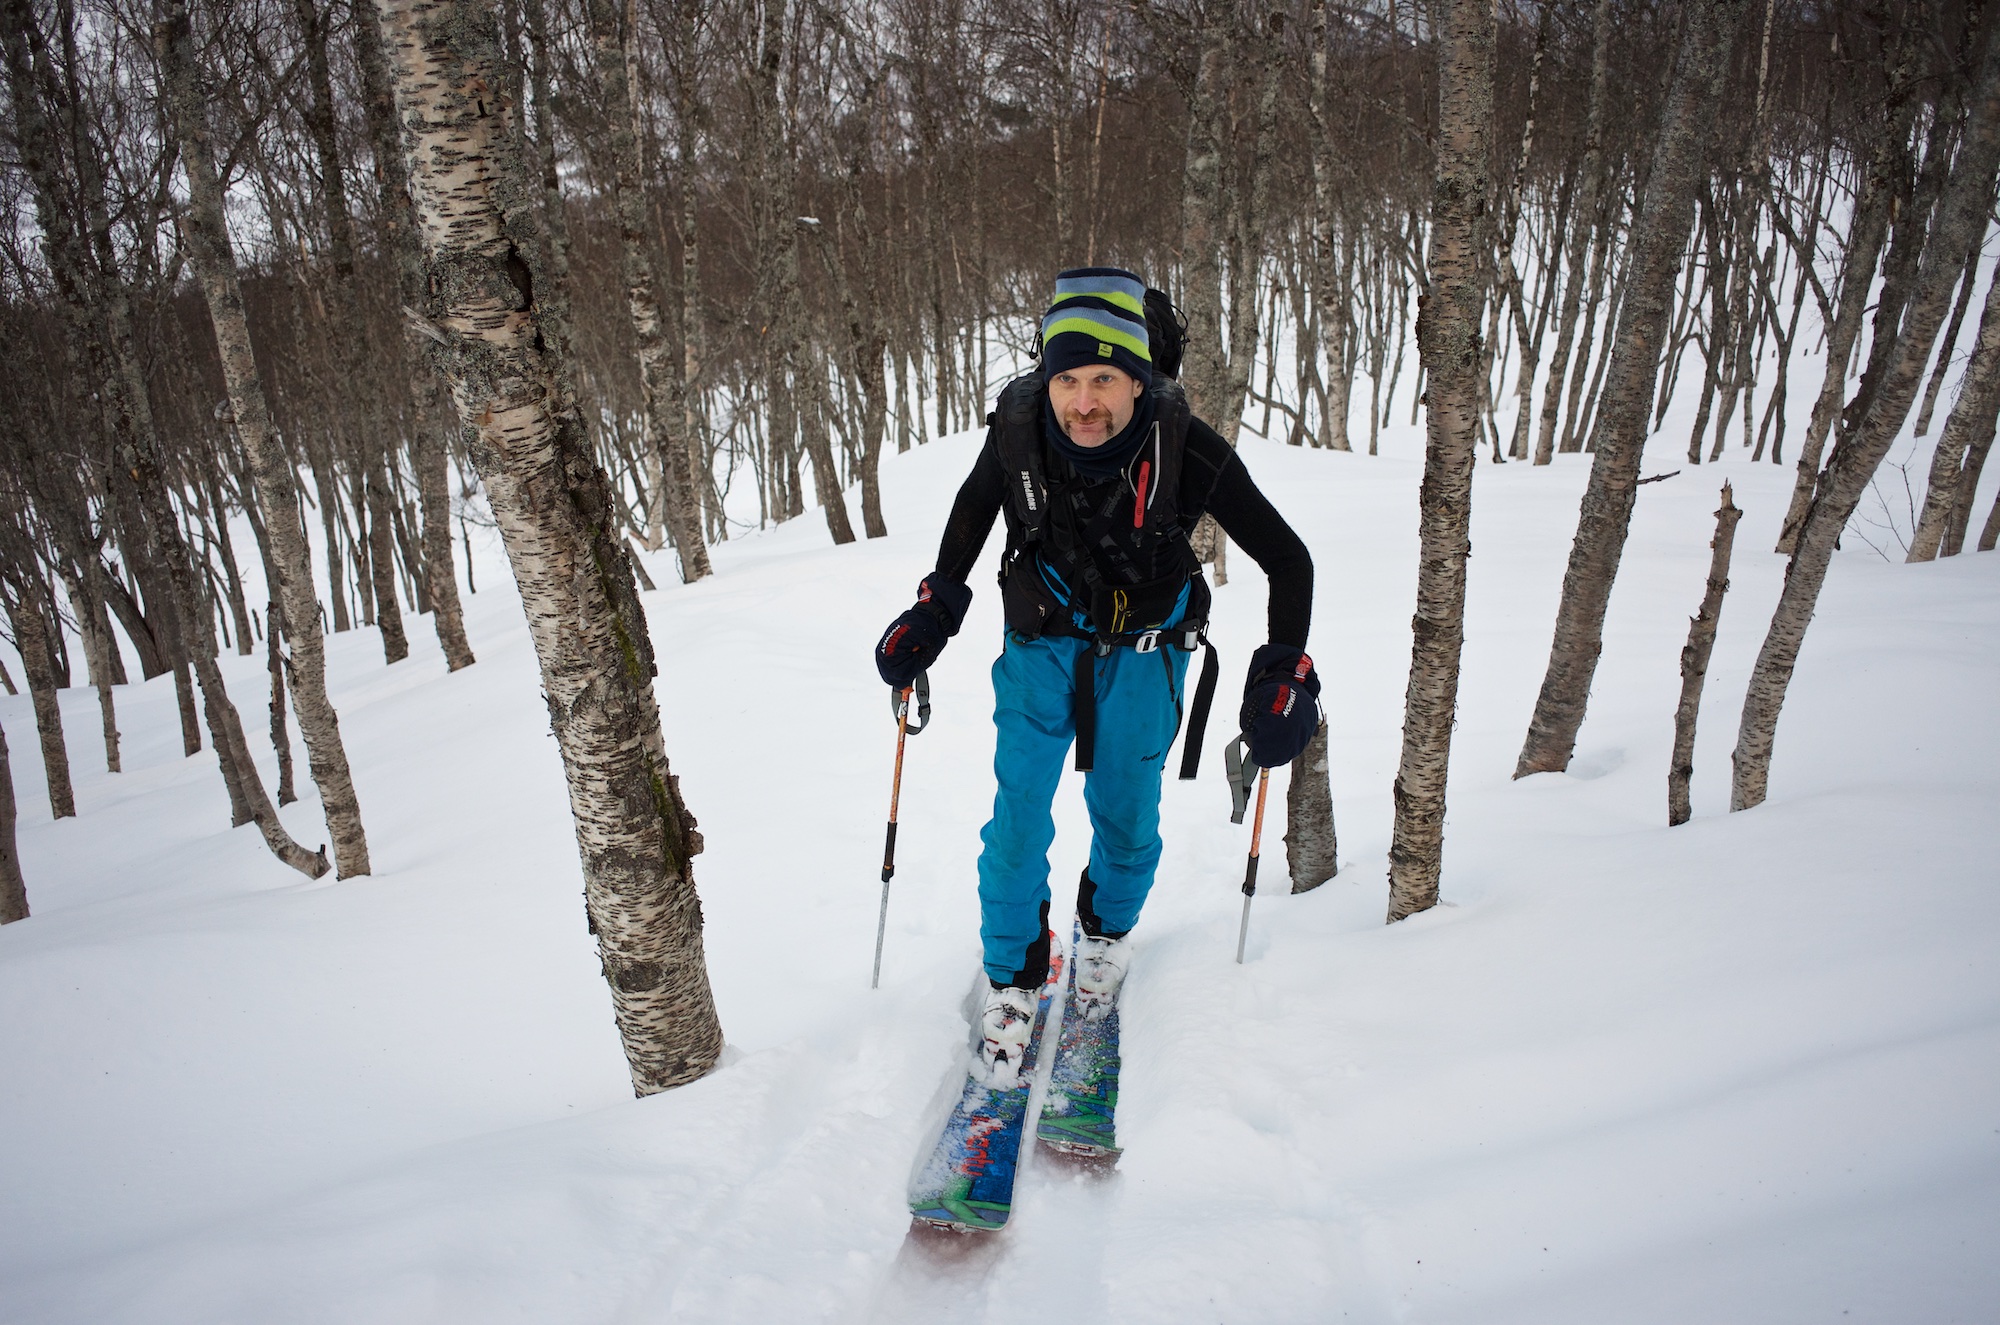 Kenneth skinning up through the birches on the lower slopes of Gorzelvtind.